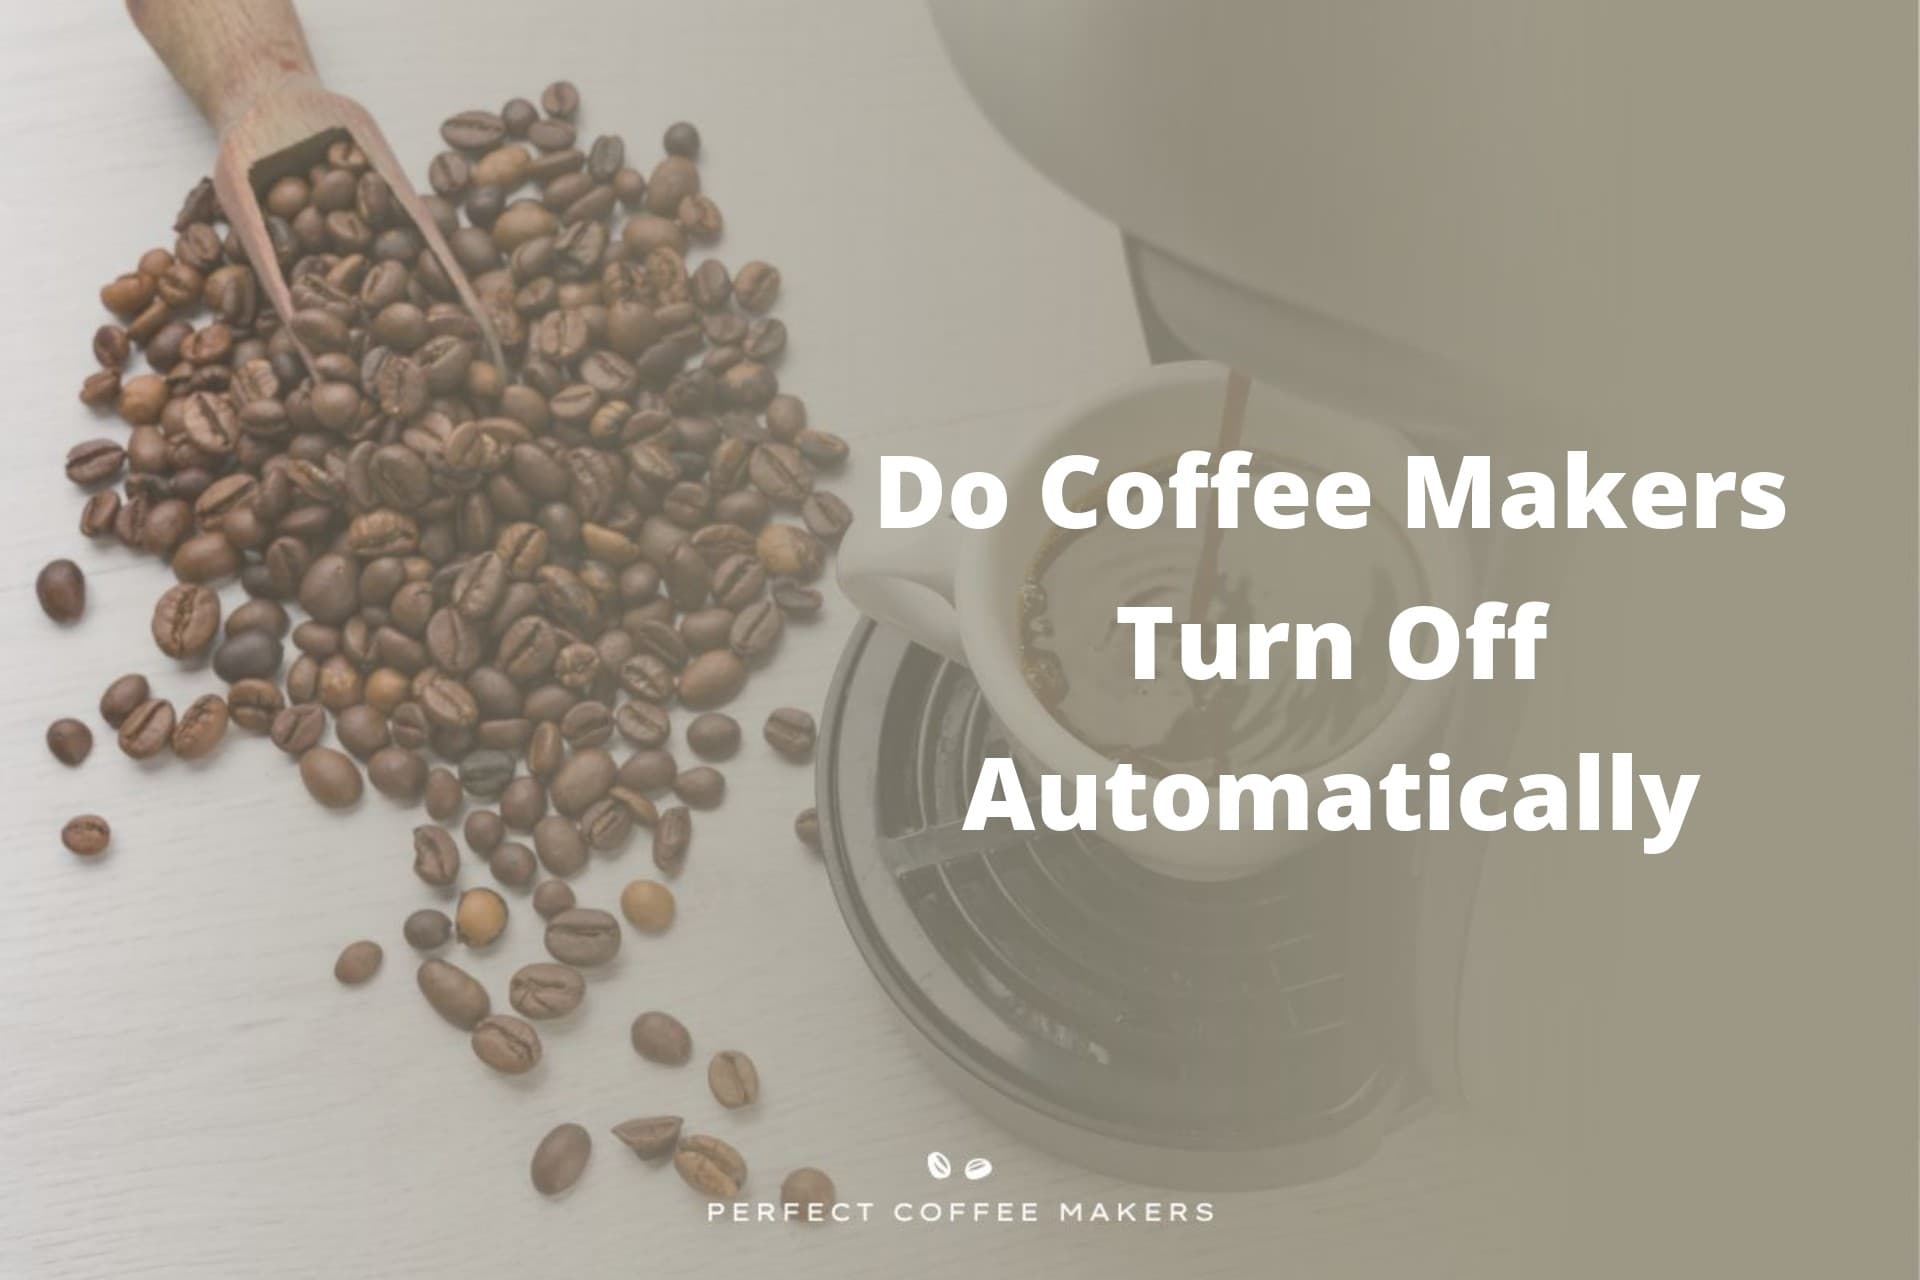 Do Coffee Makers Turn Off Automatically